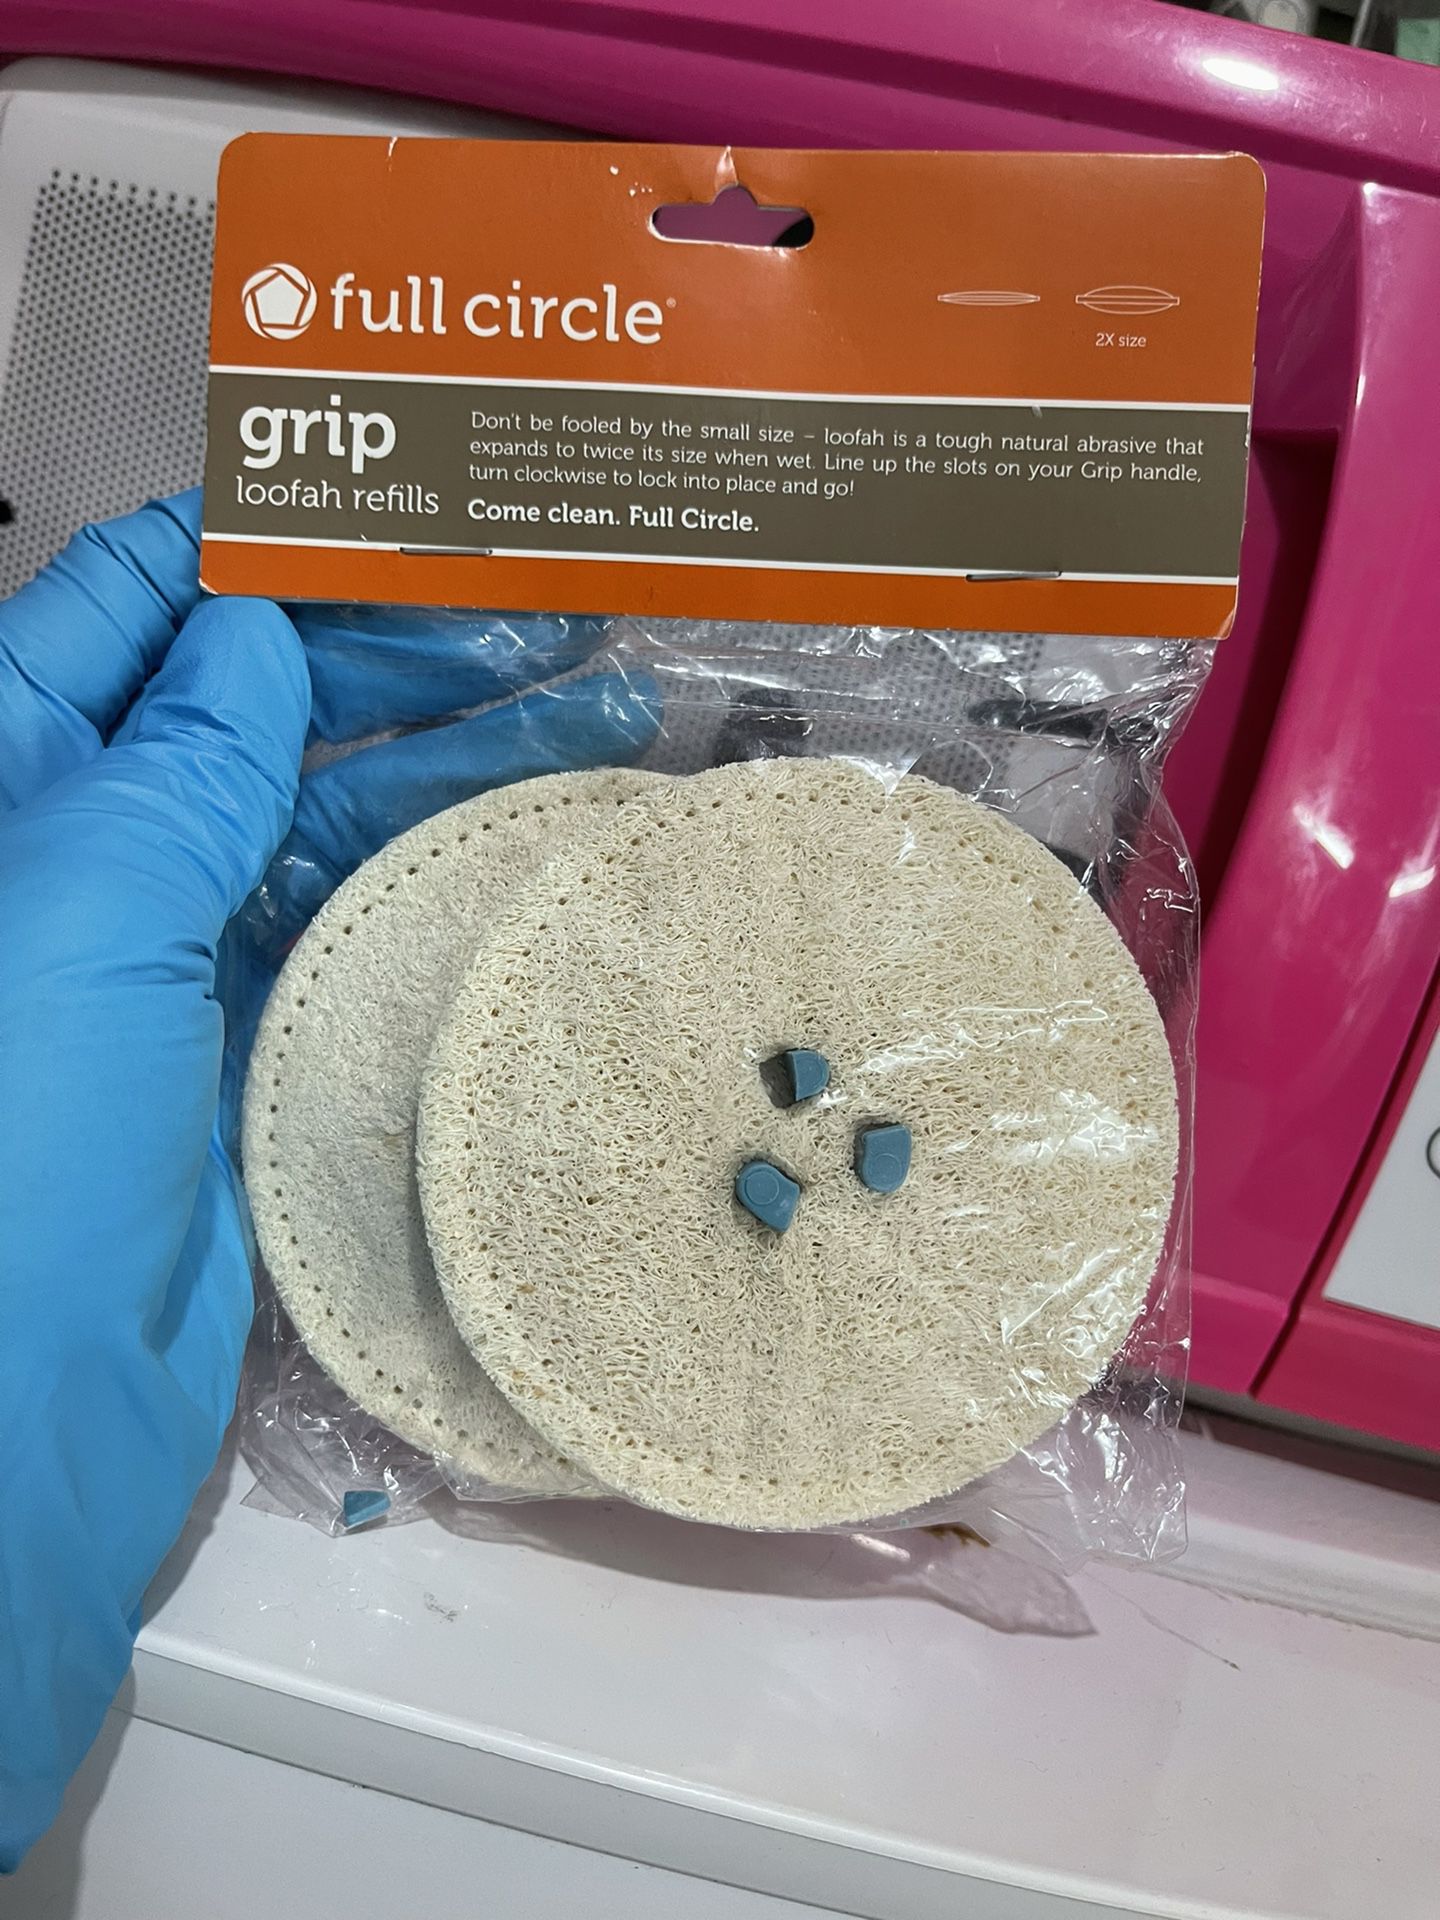 Full Circle Grip Replacement Loofahs